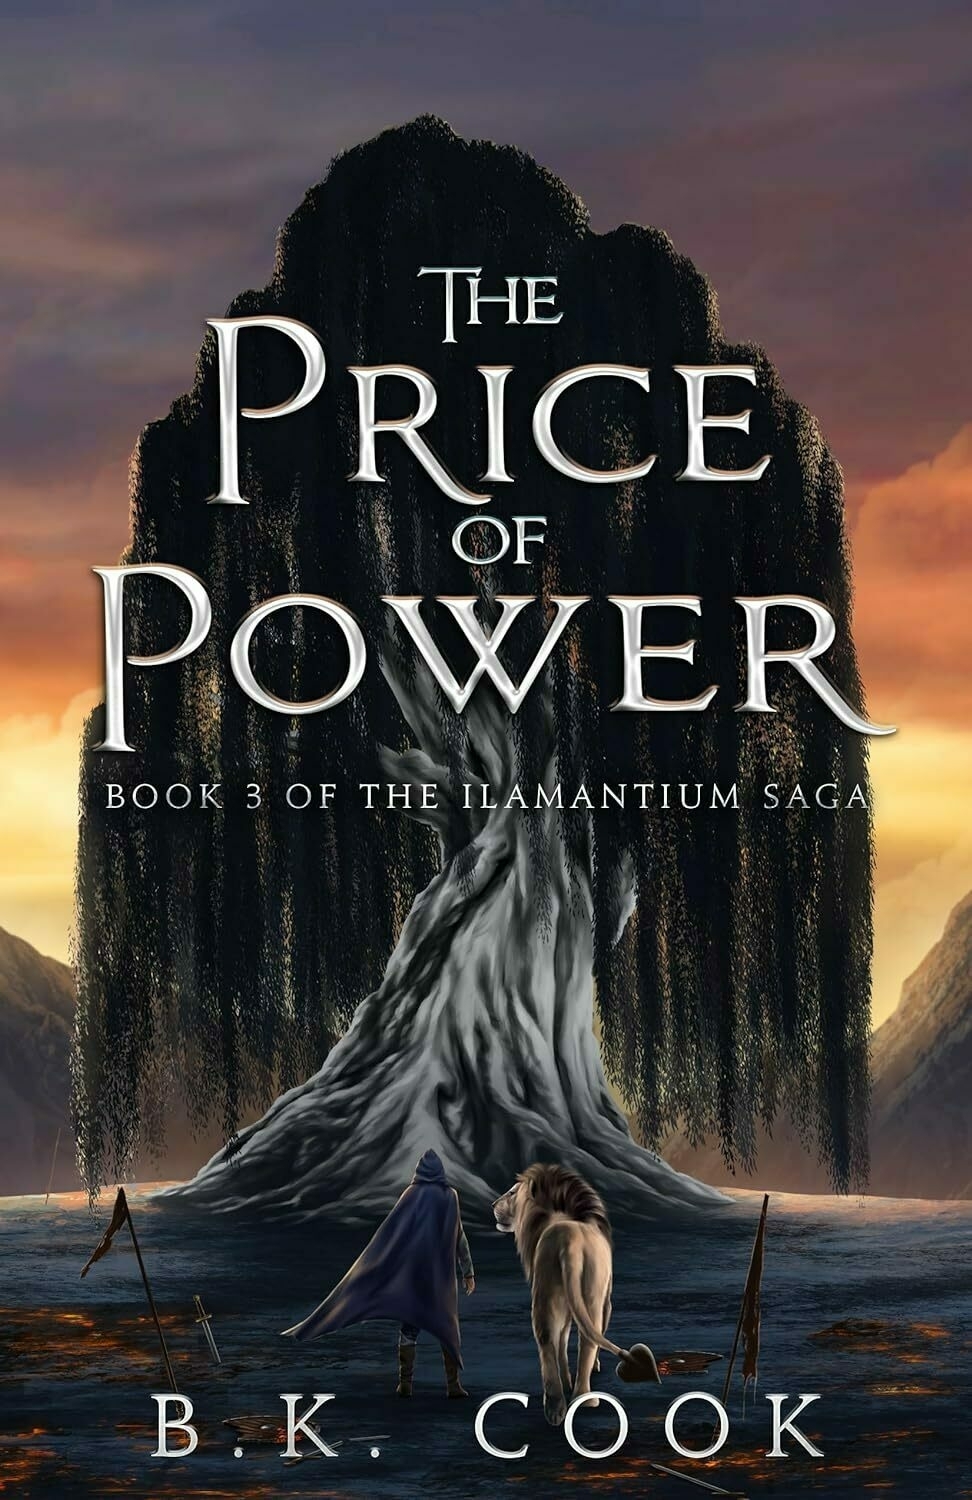 A cloaked figure and a lion approach a large tree against a mountainous backdrop at dusk. Text: 'THE PRICE OF POWER BOOK 3 OF THE ILAMANTIUM SAGA B.K. COOK'